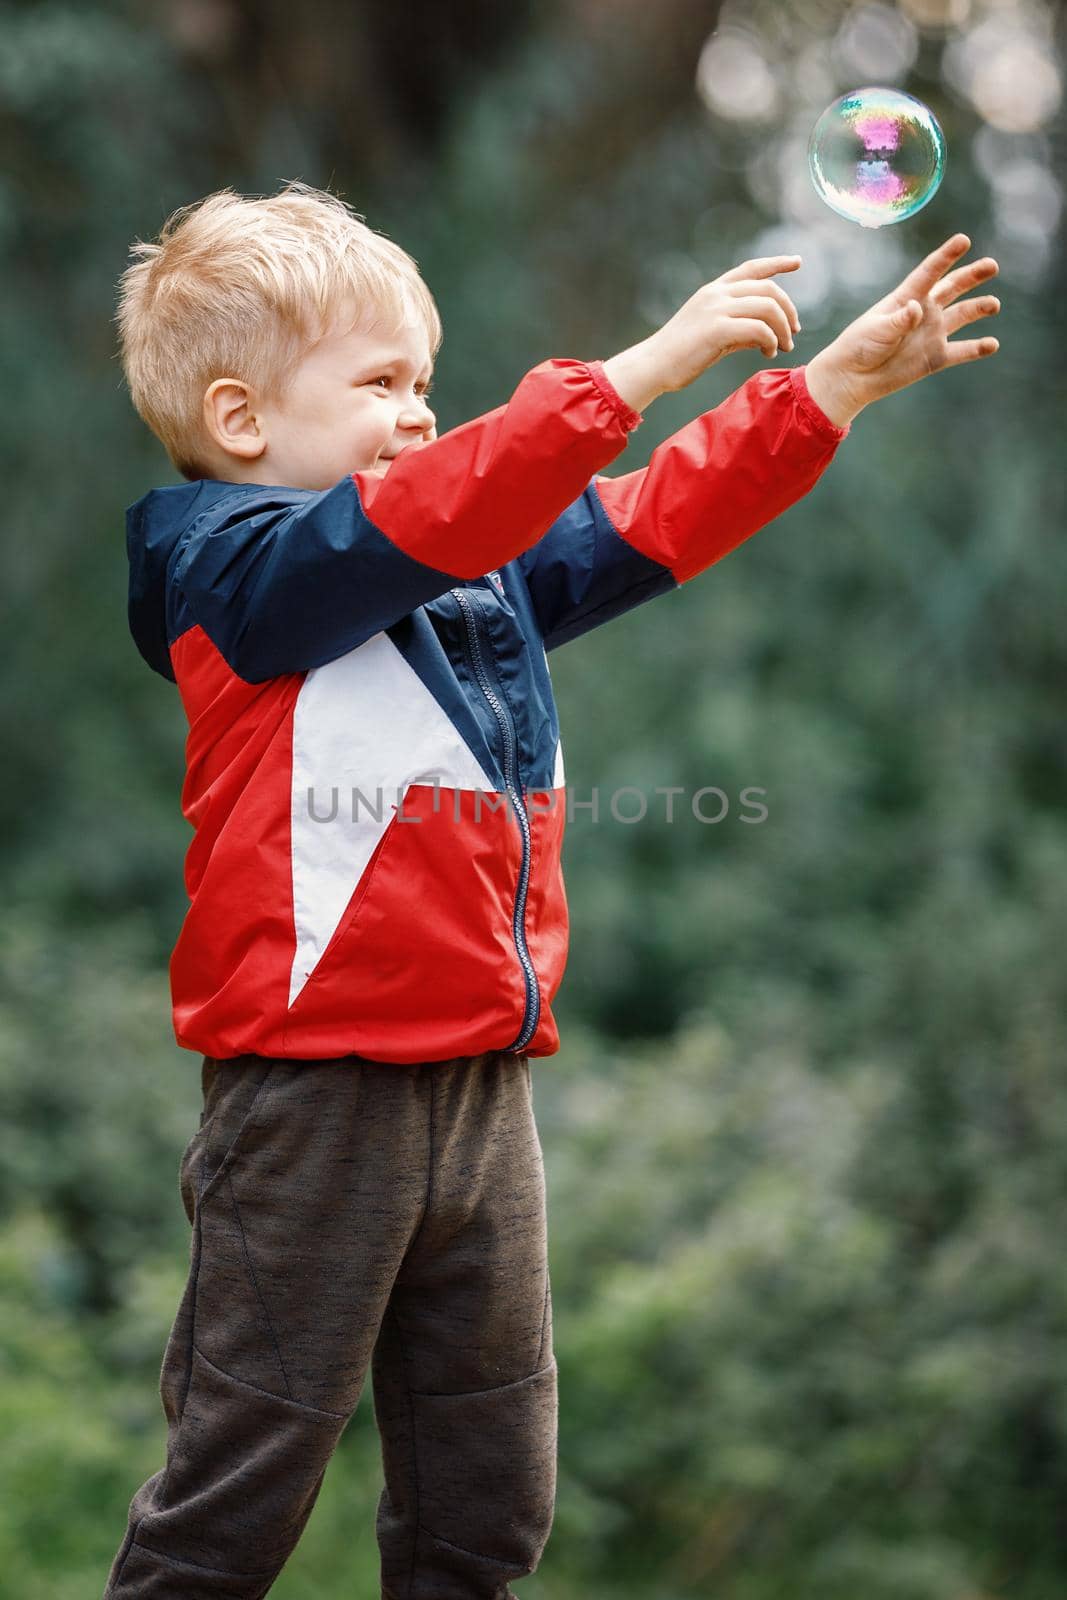 Very happy kid trying to catch soap bubble.